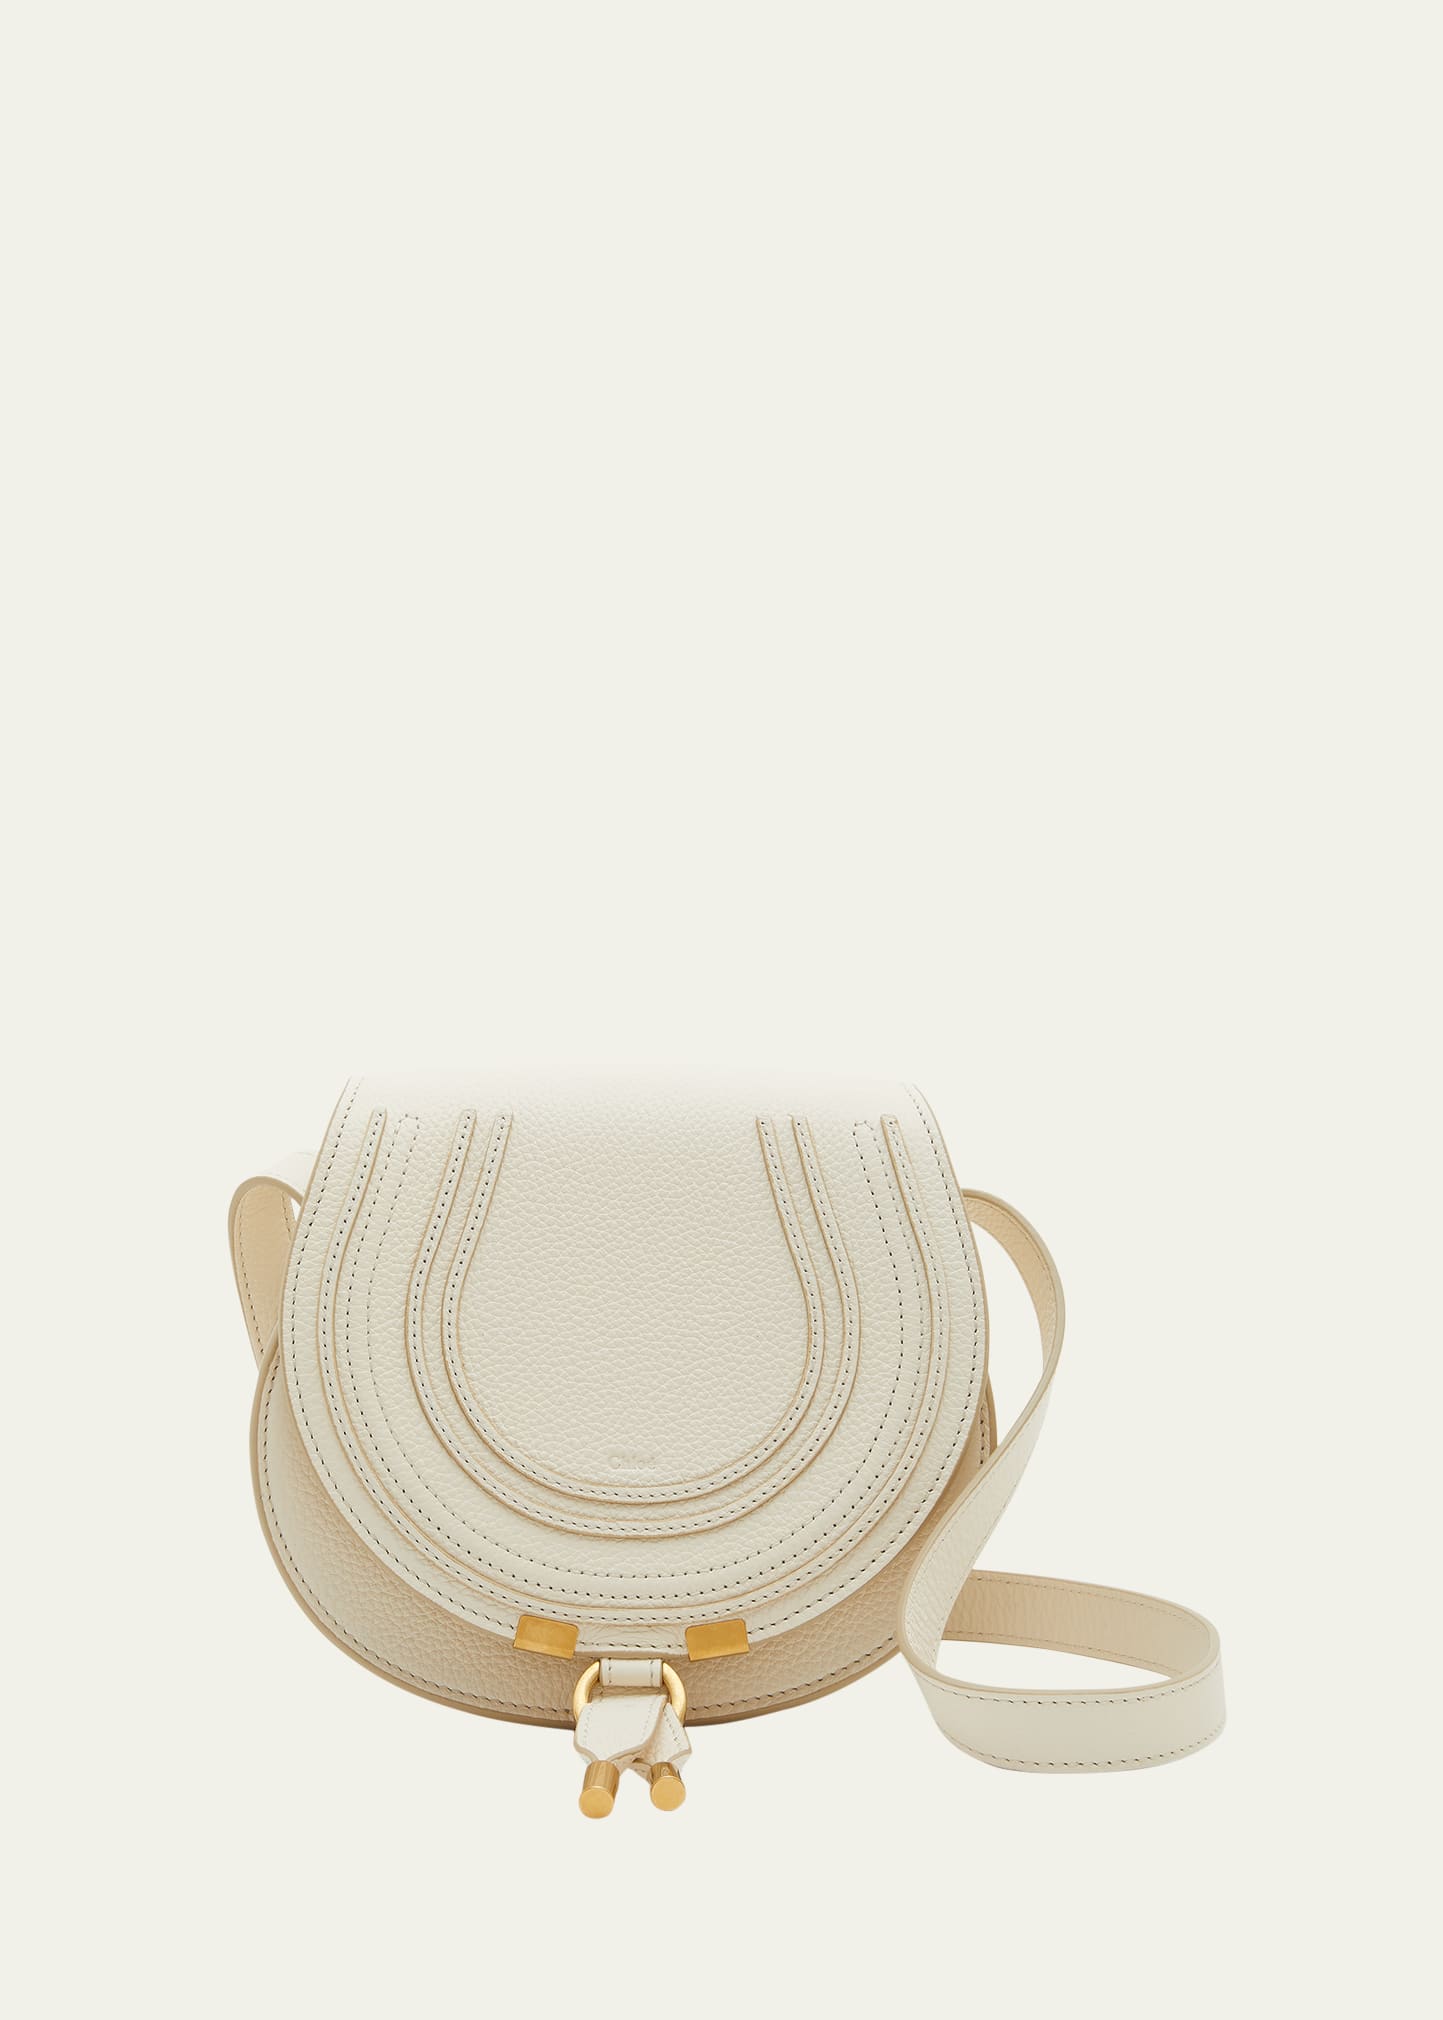 Another what really fits in that mini bag featuring Chloe Mini Marcie  Saddlebag : r/handbags